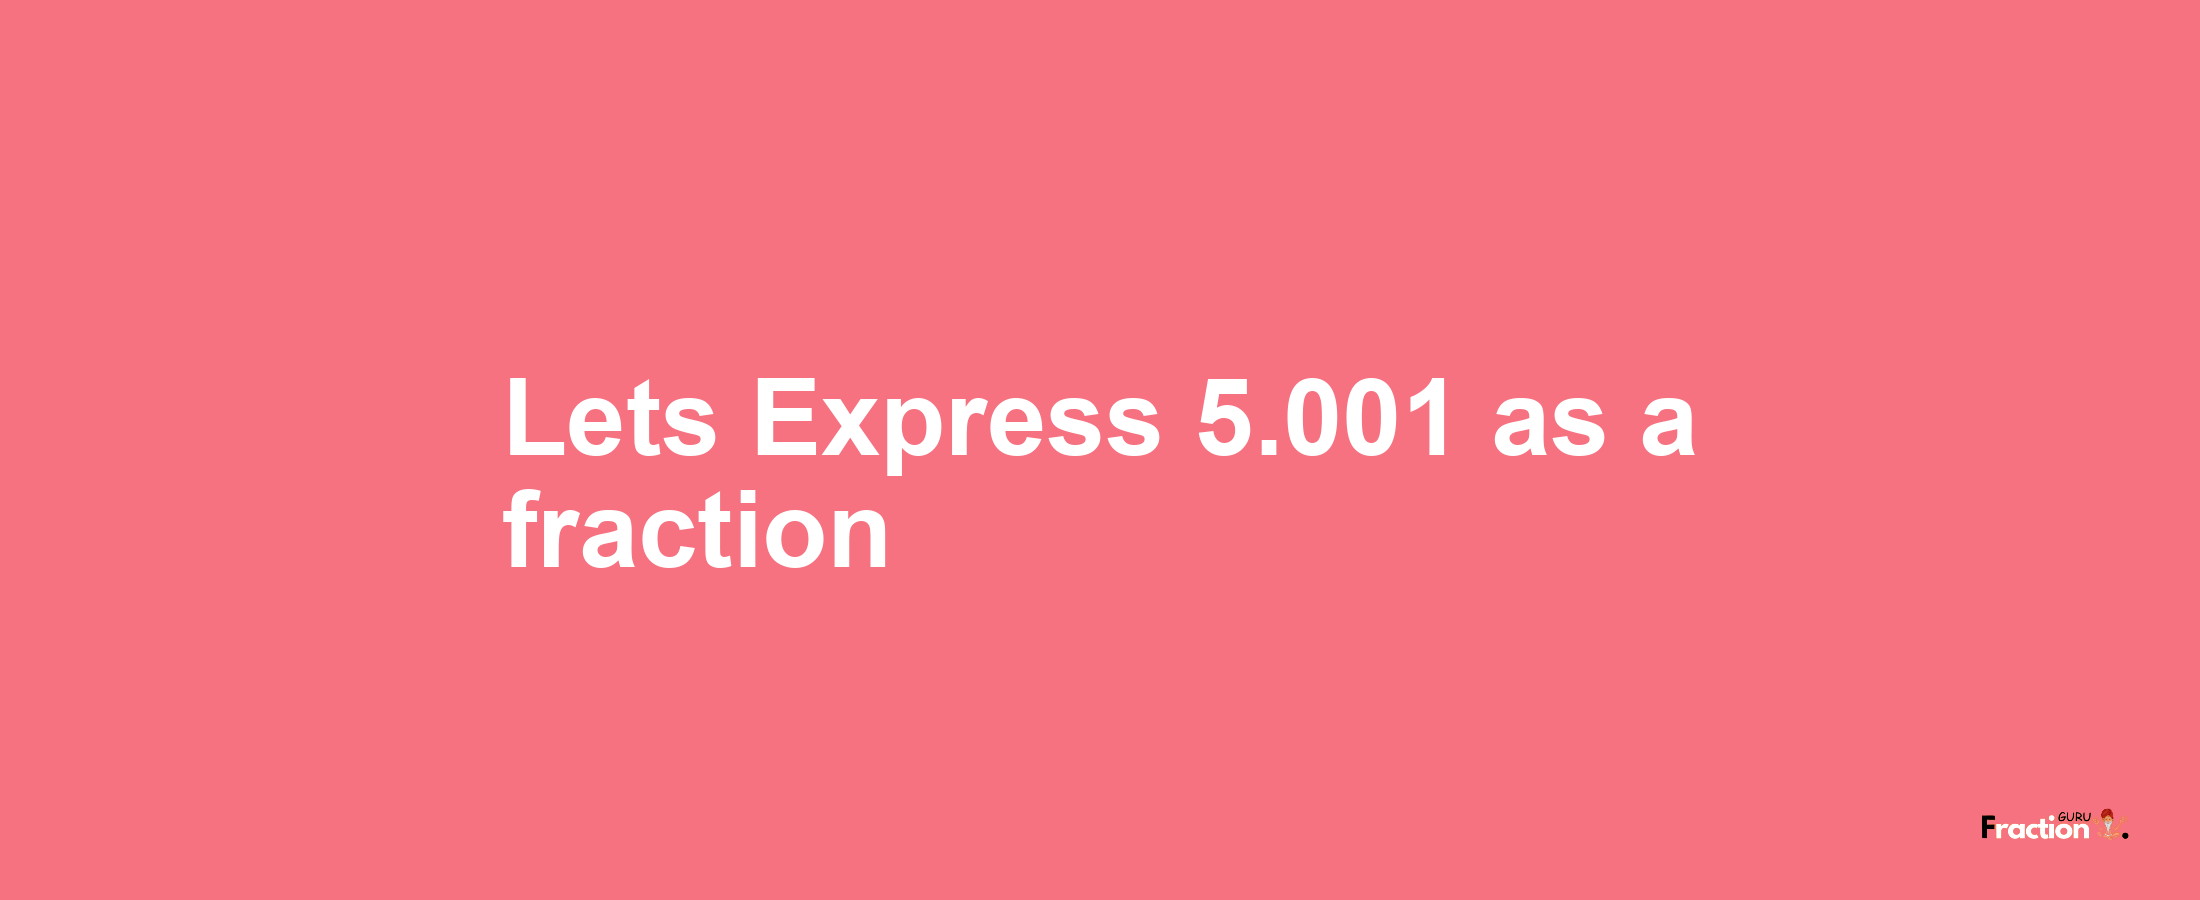 Lets Express 5.001 as afraction